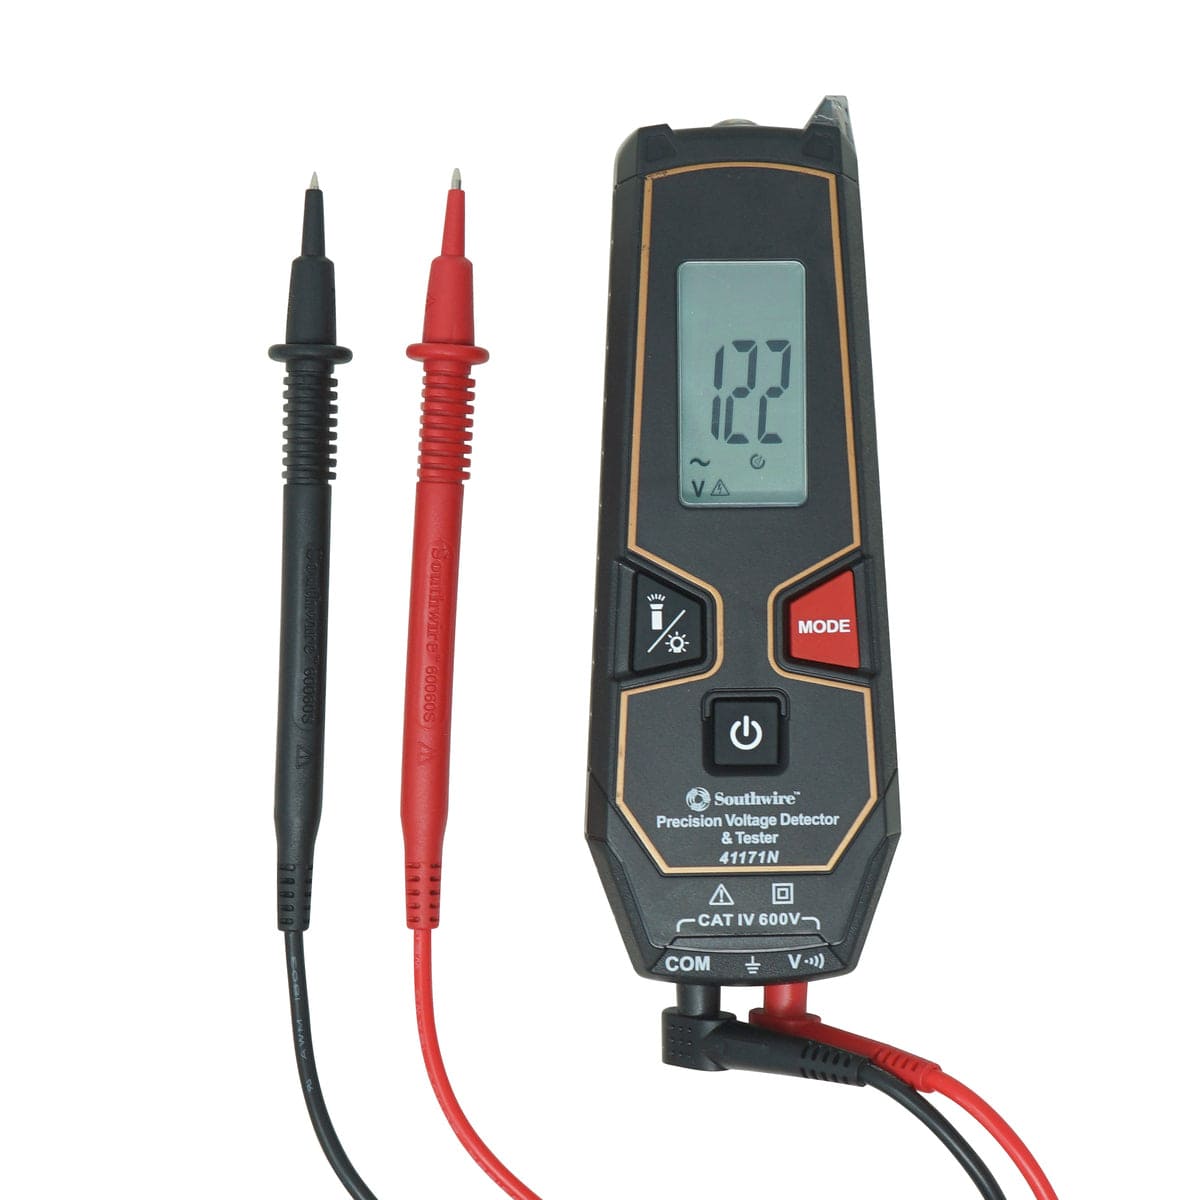 Southwire 41171N Precision Voltage Detector & Tester